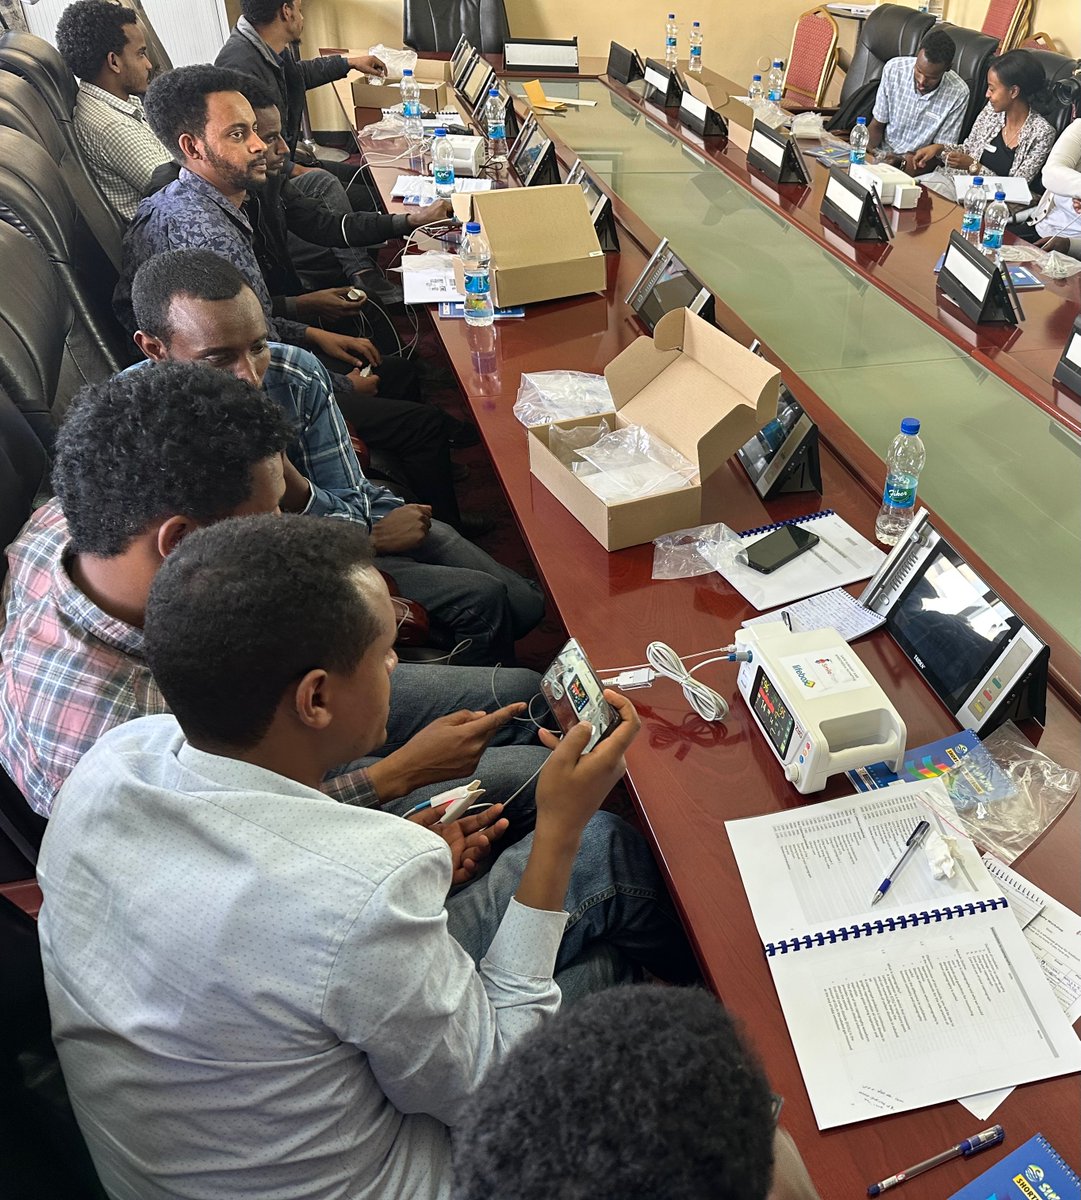 Proud to be a part of Team piloting new Capno Educational materials @y12hmc in Ethiopia in an effort to bring high quality,affordable and accessible Capnography devices to LRS where they are much needed! @Smiletrain @SaferSurgery @wfsaorg @UCSFAnesthesia @ProfEllenO